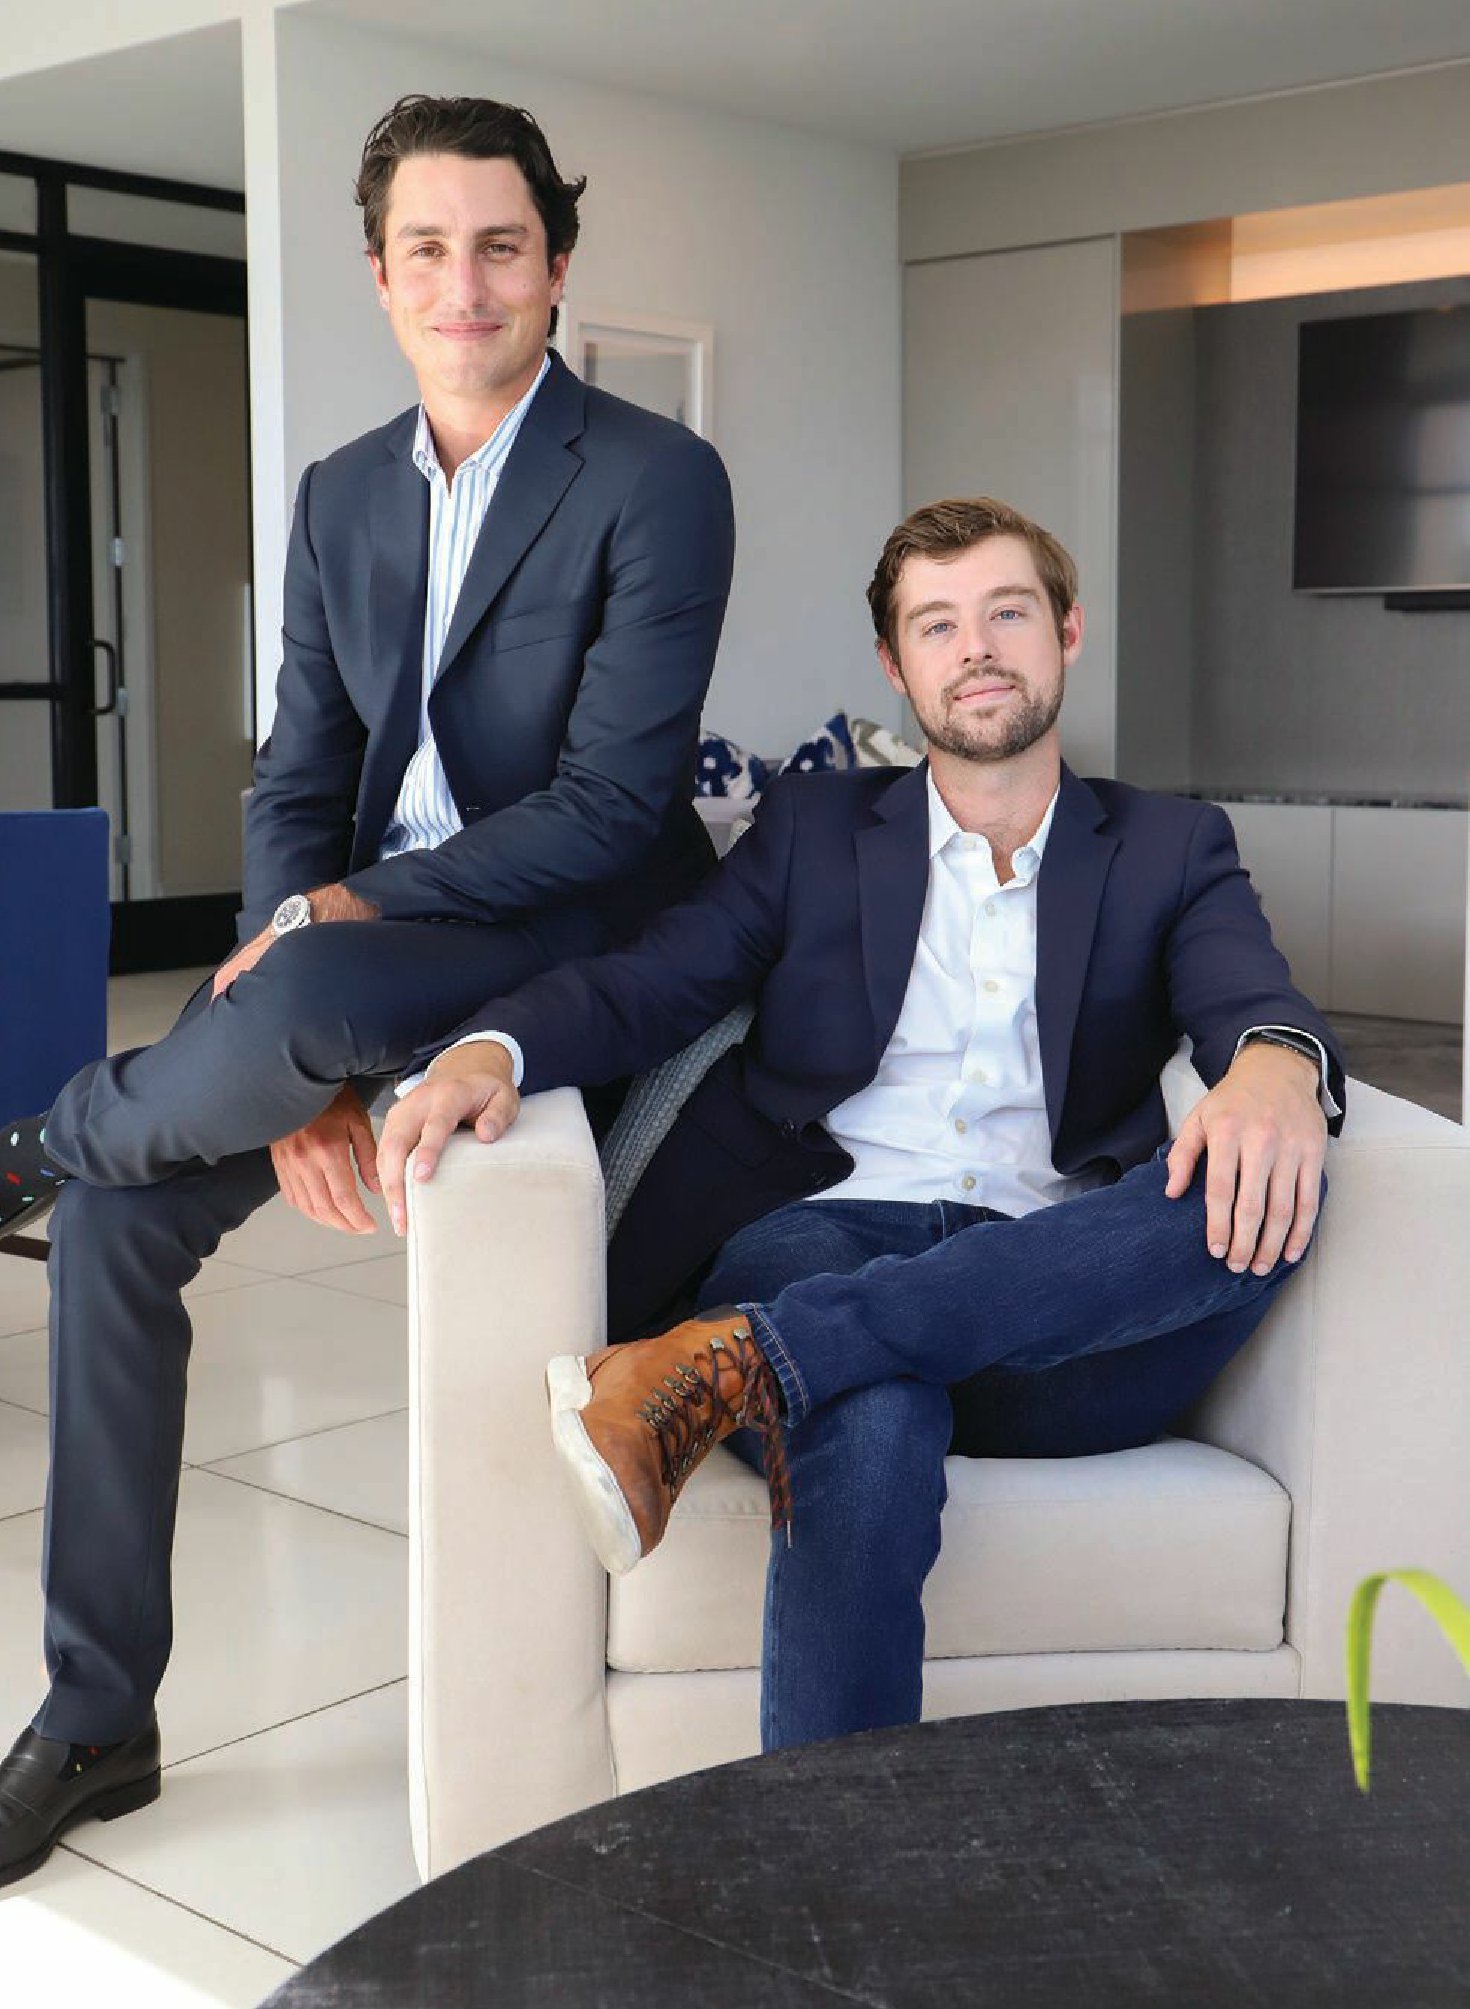 Founders Maxime Blandin and Dillon Baxter. PHOTO COURTESY OF PLANTSWITCH